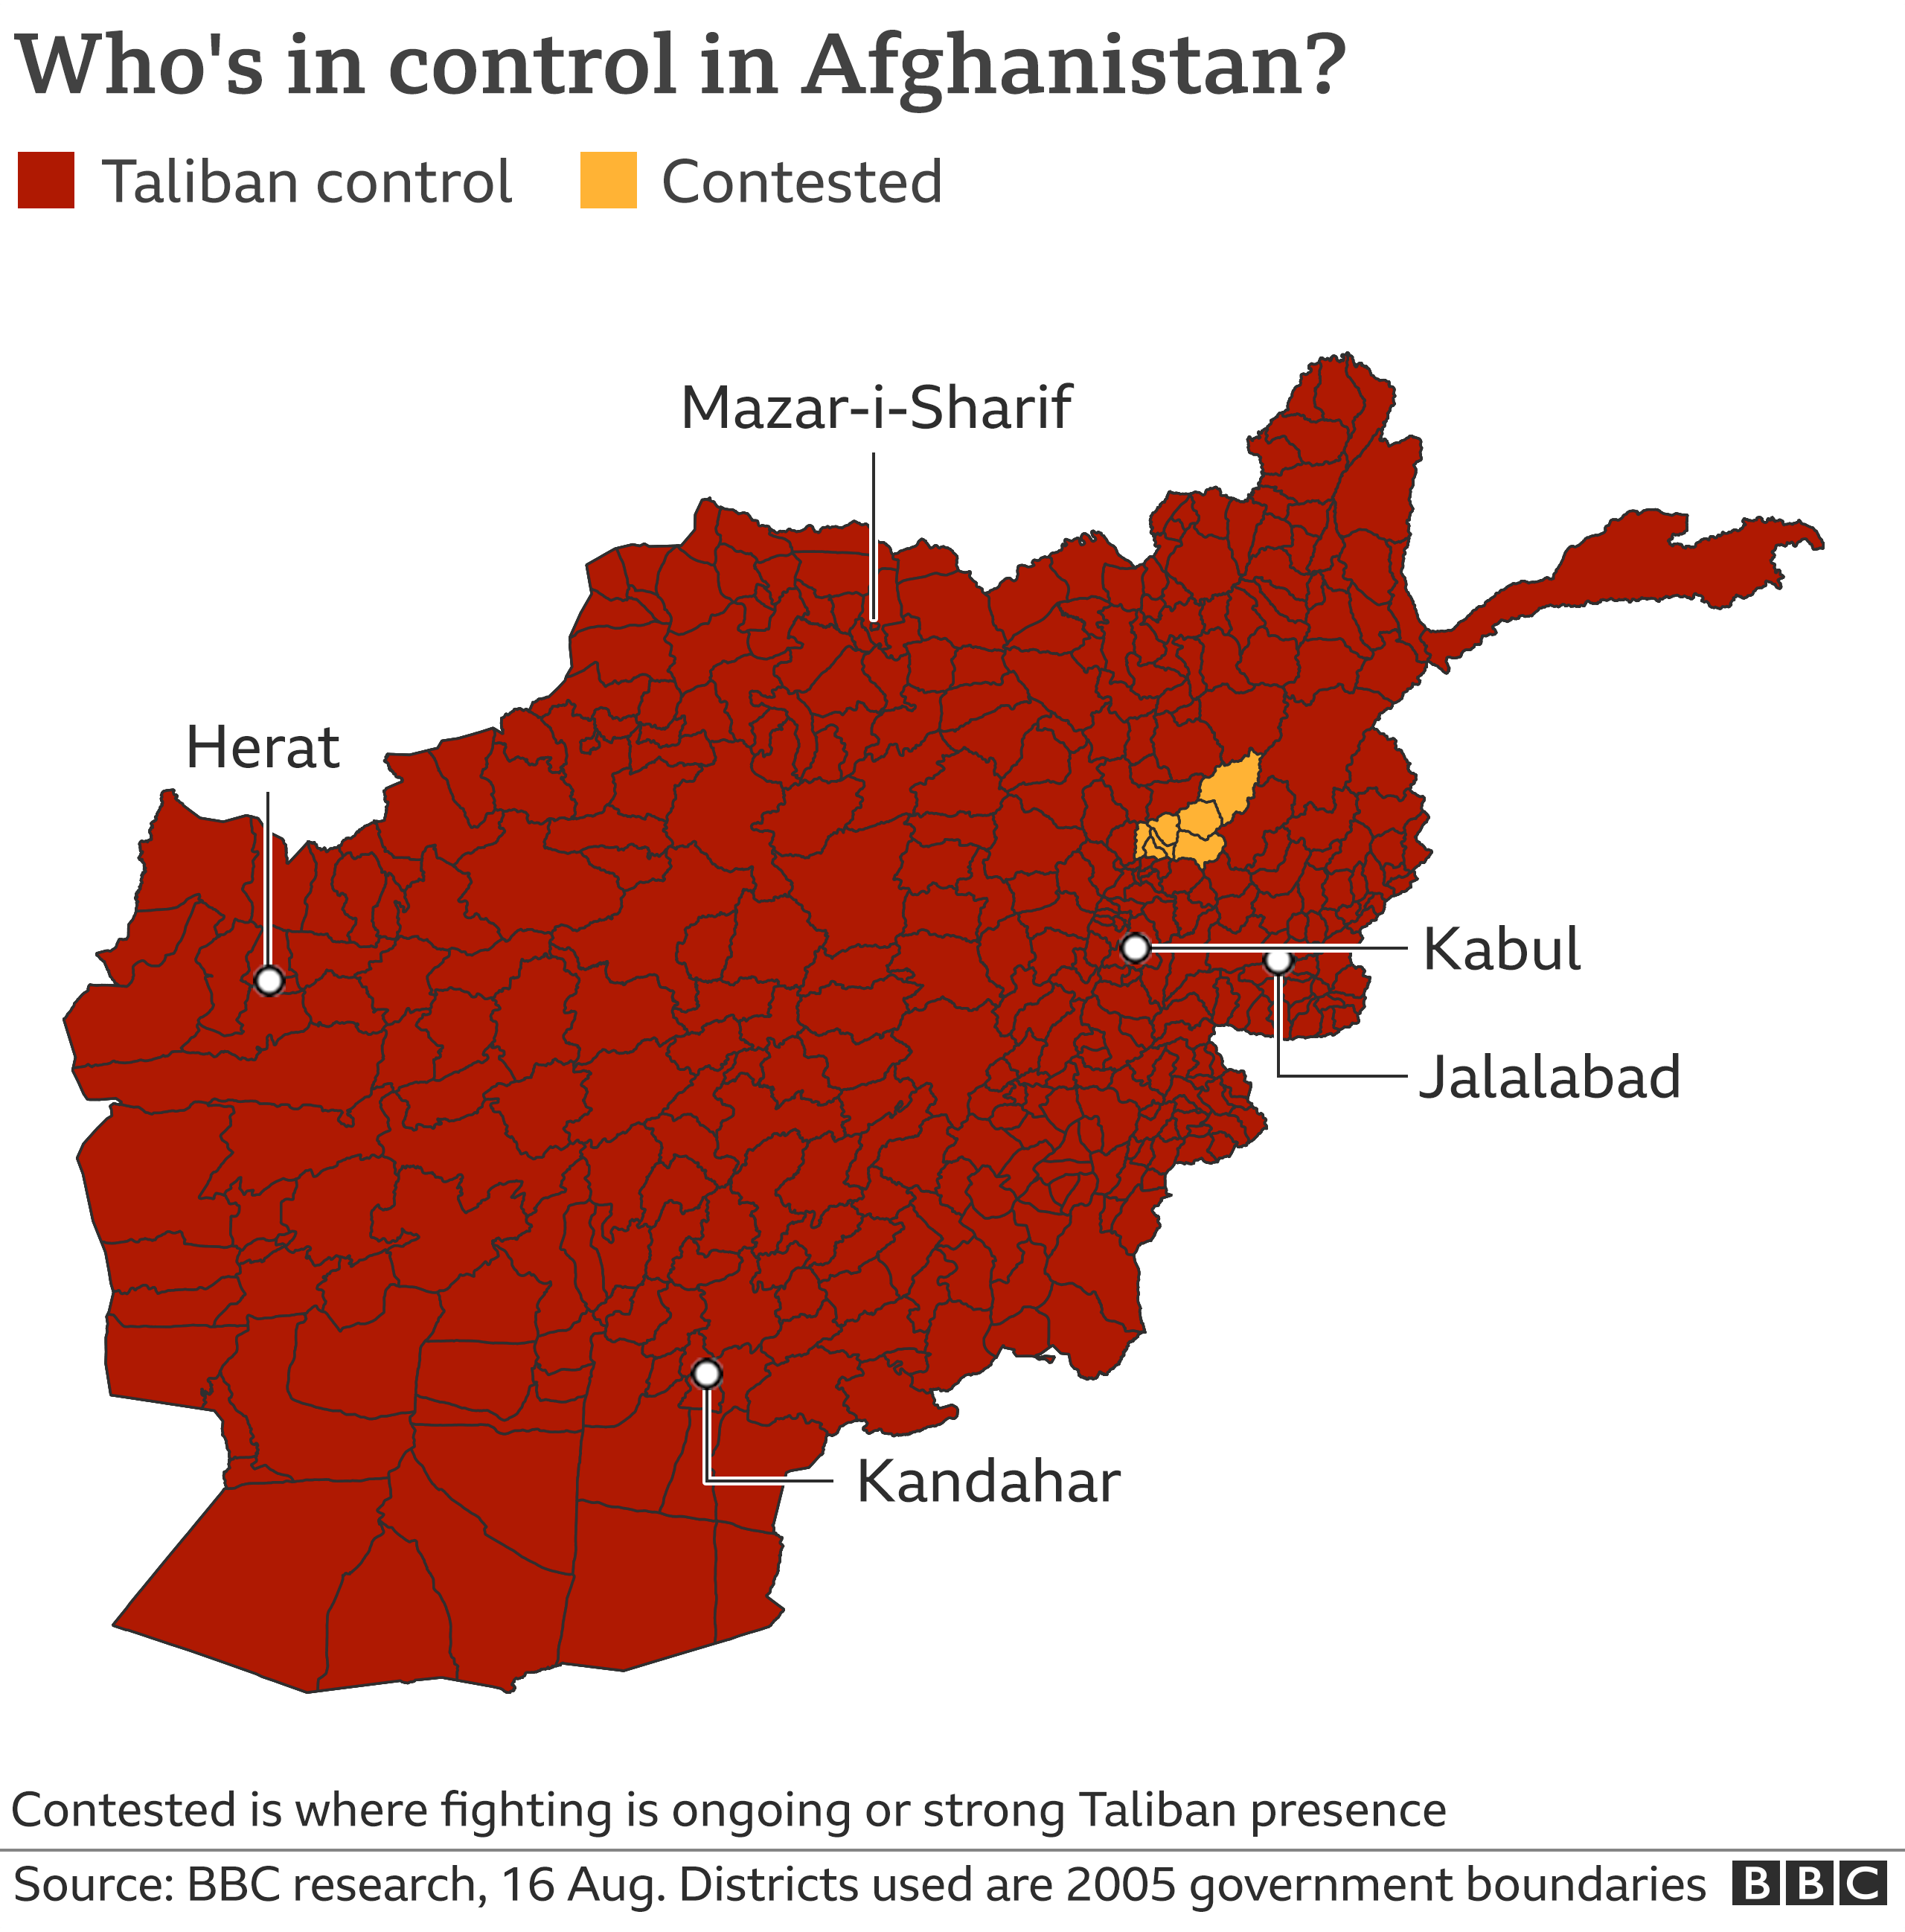 map showing territory controlled by taliban versus contested regions